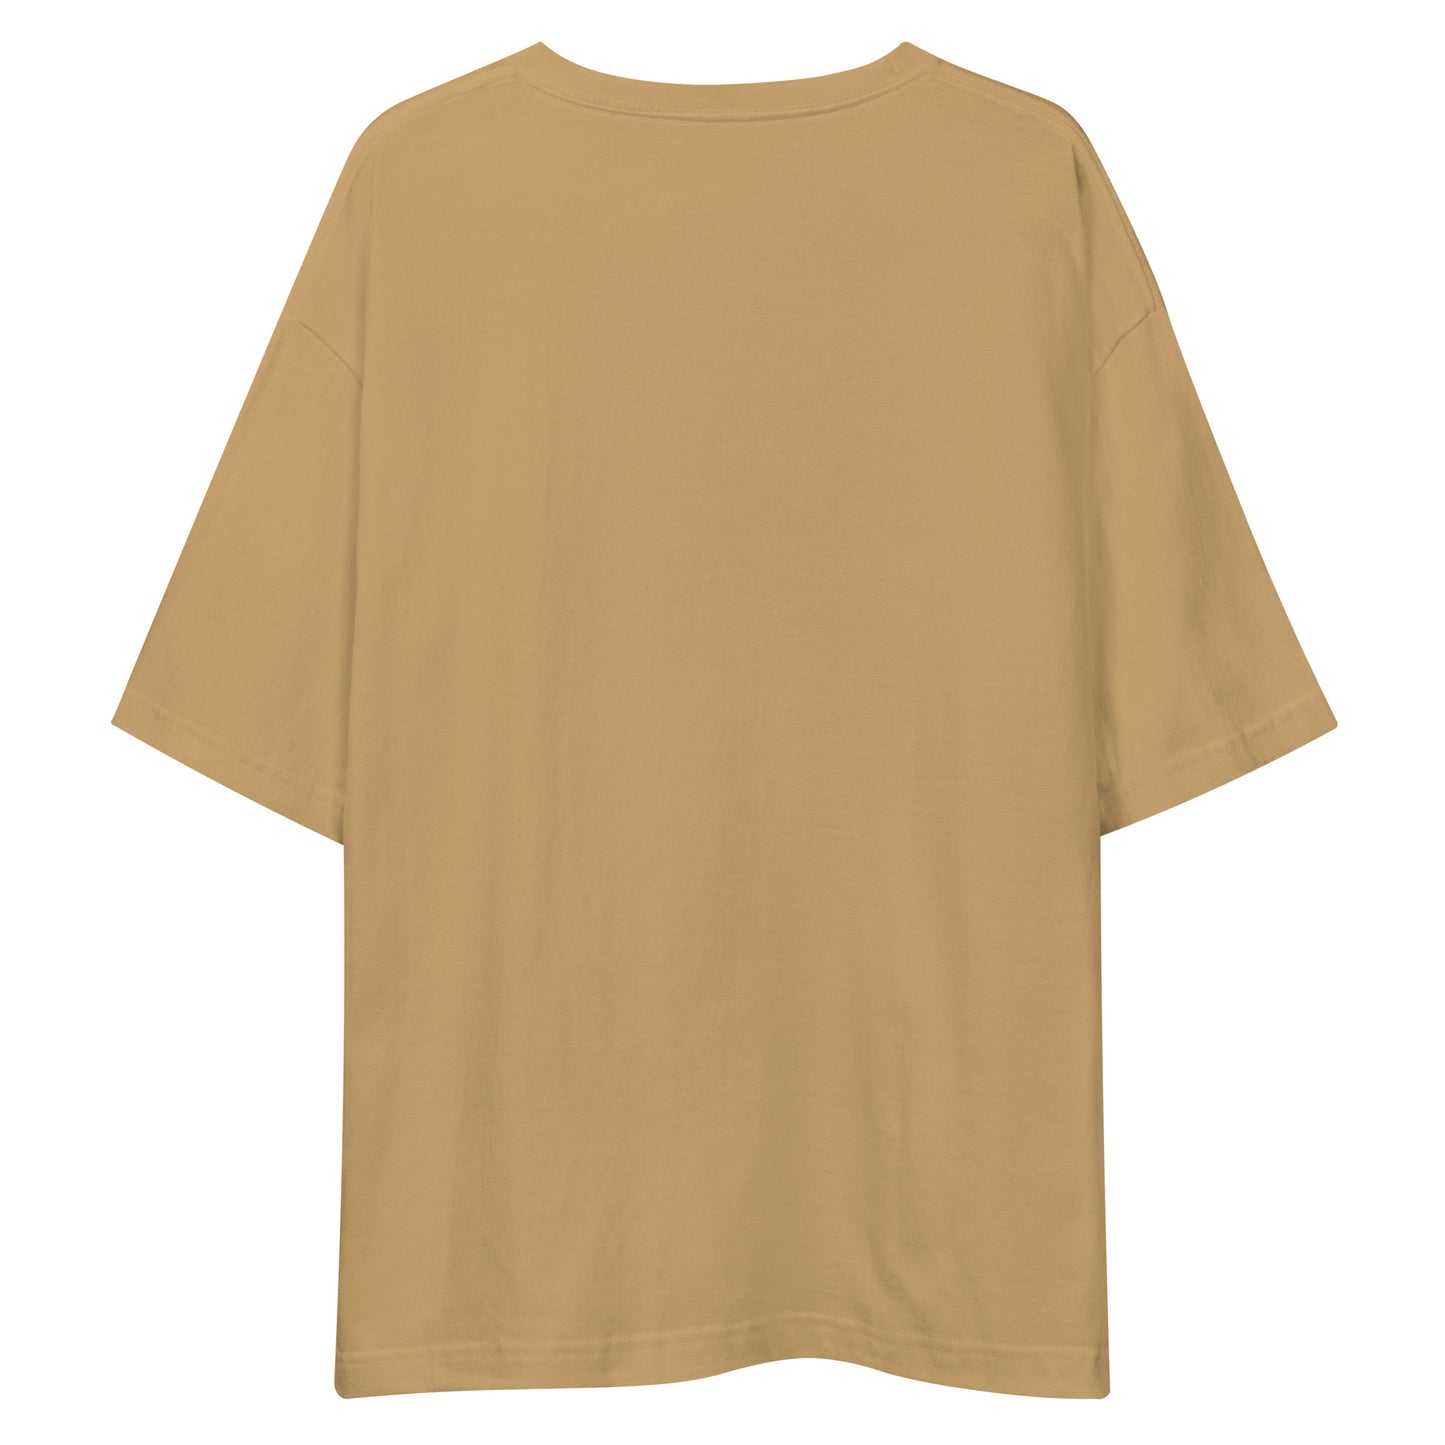 H203 - T-shirt/Oversized (Hunting : Brown)